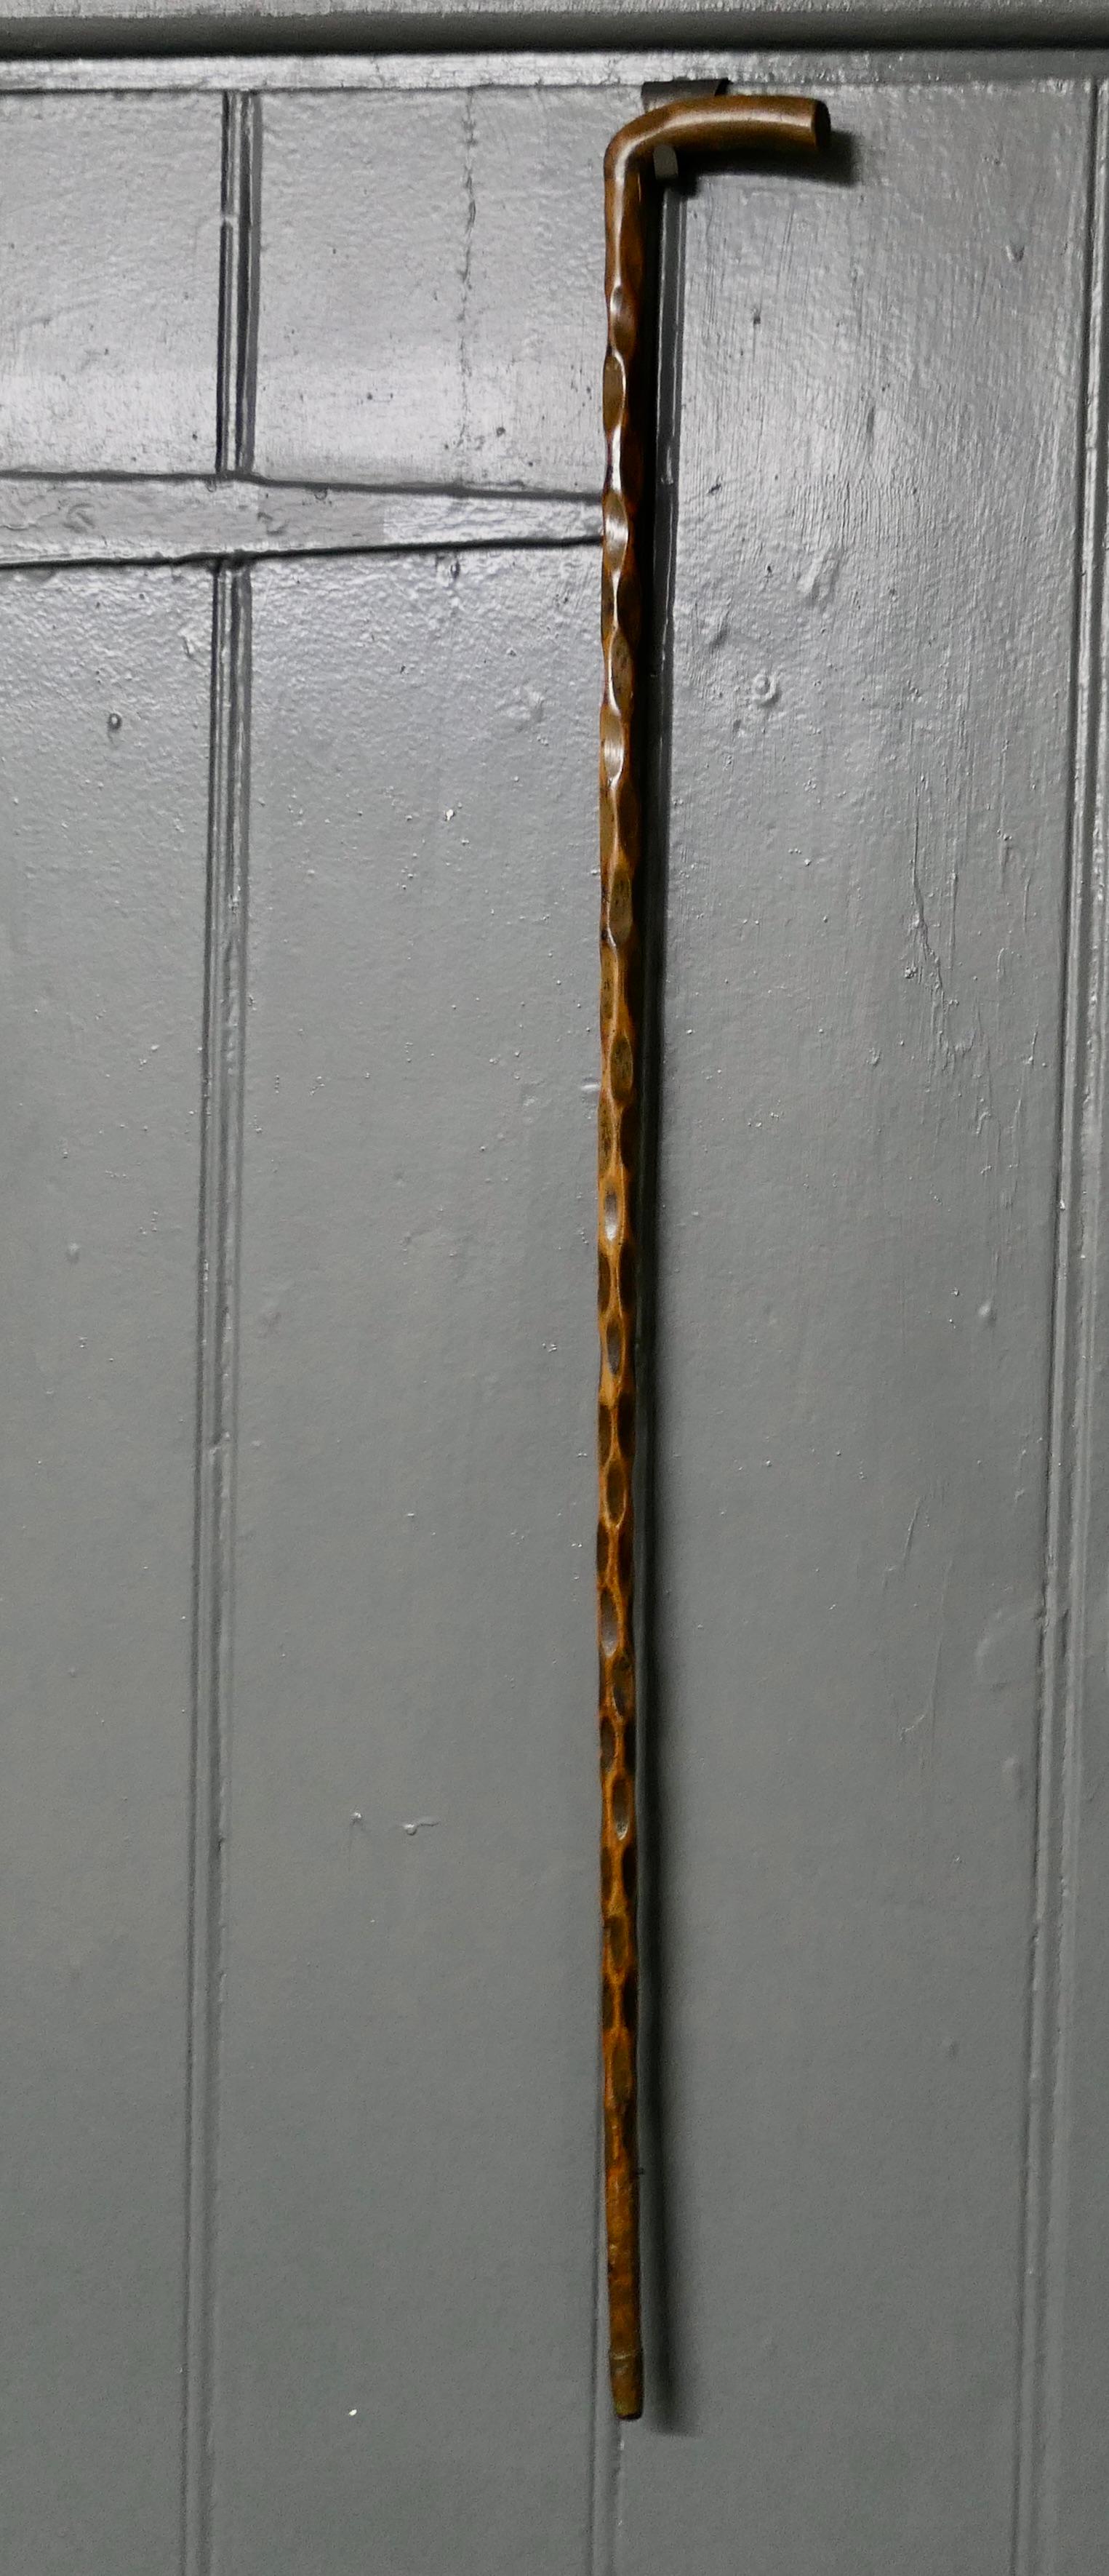 A Beautiful Natural Wood Zig Zag Shaft walking cane 

A Very attractive well loved piece and possibly made from a Vegetable Stalk, the zig zag pattern is very evenly distributed. The cane is elegantly tapering with an integral handle also